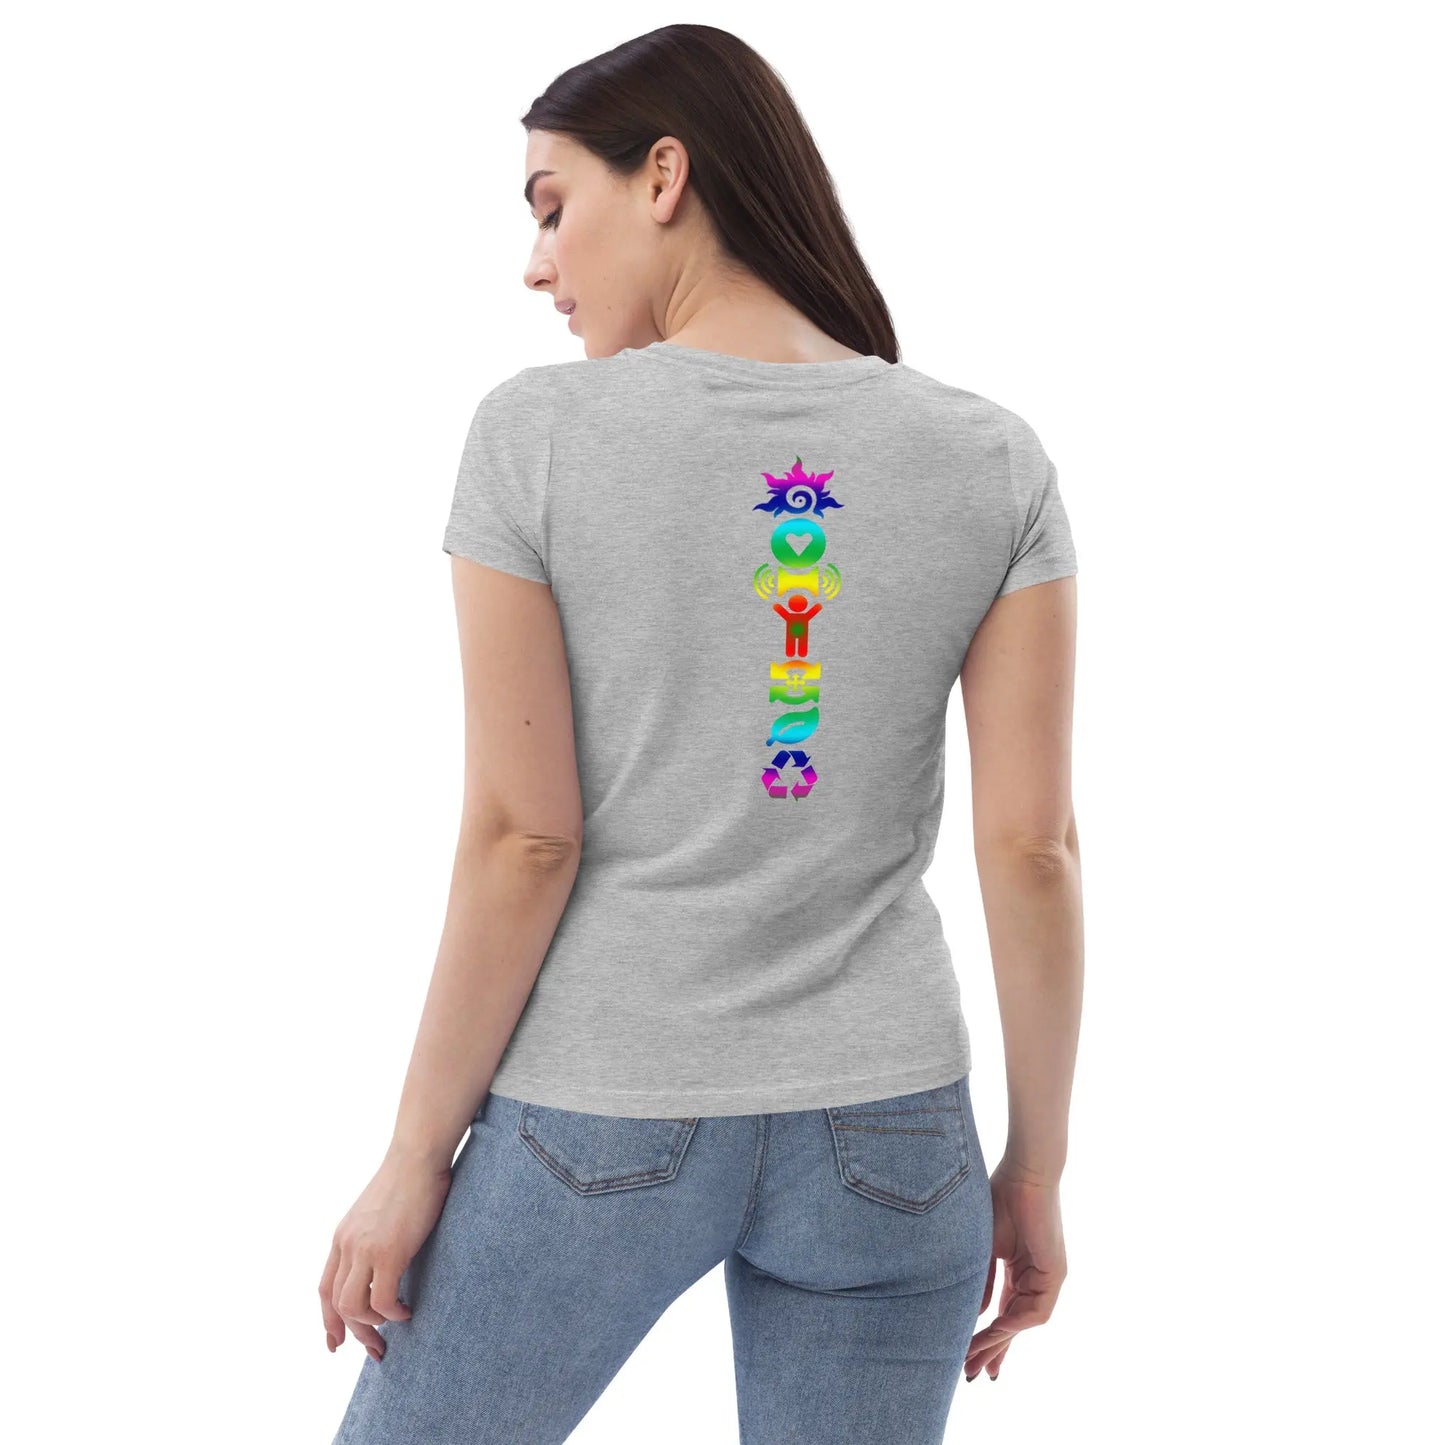 Women's fitted eco tee ActSunx - Image #20